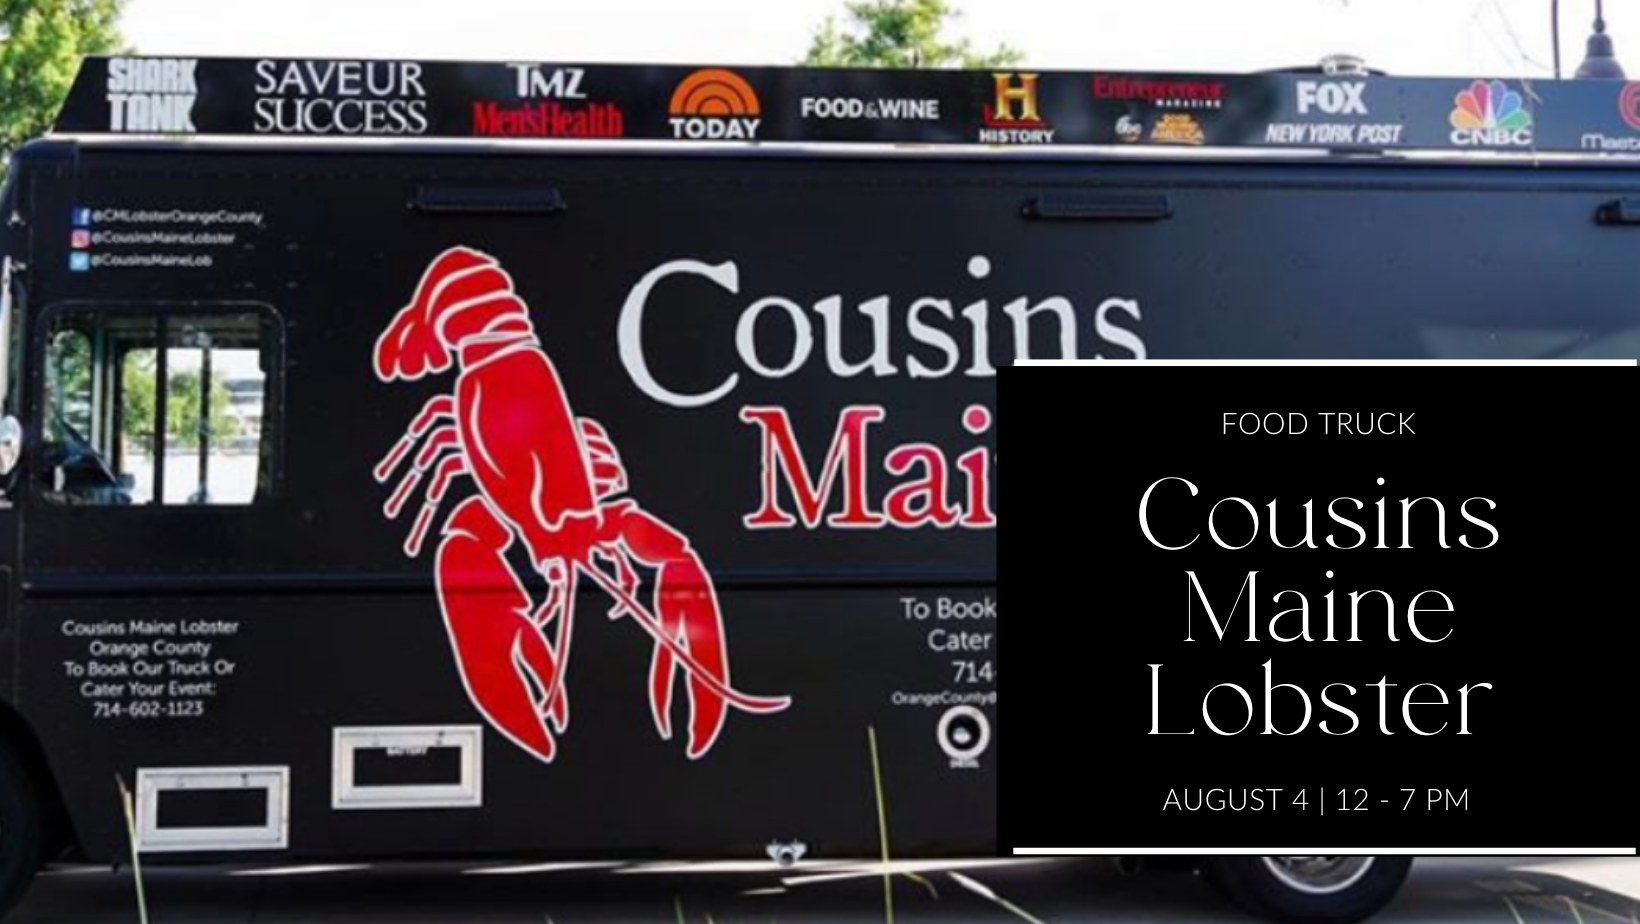 Food Truck: Cousins Maine Lobster